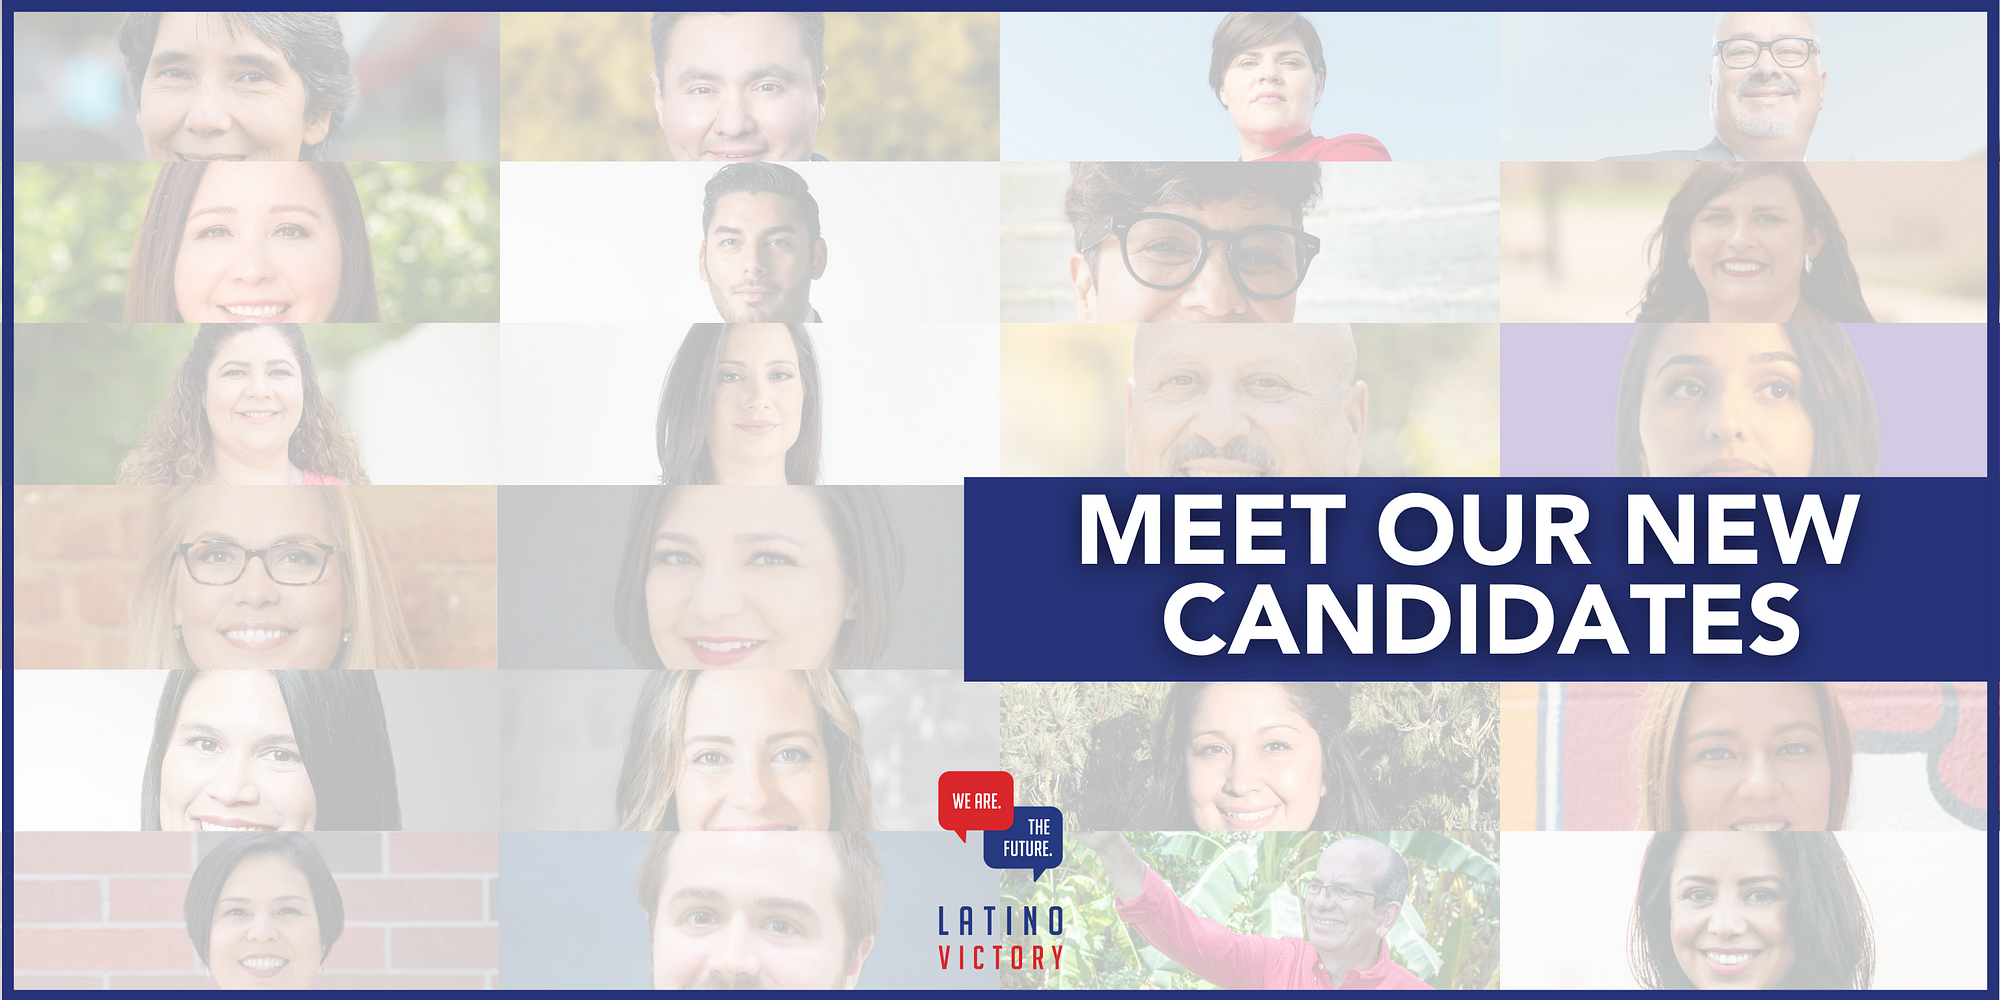 Latino Victory Fund PAC endorses possible congressional Latino